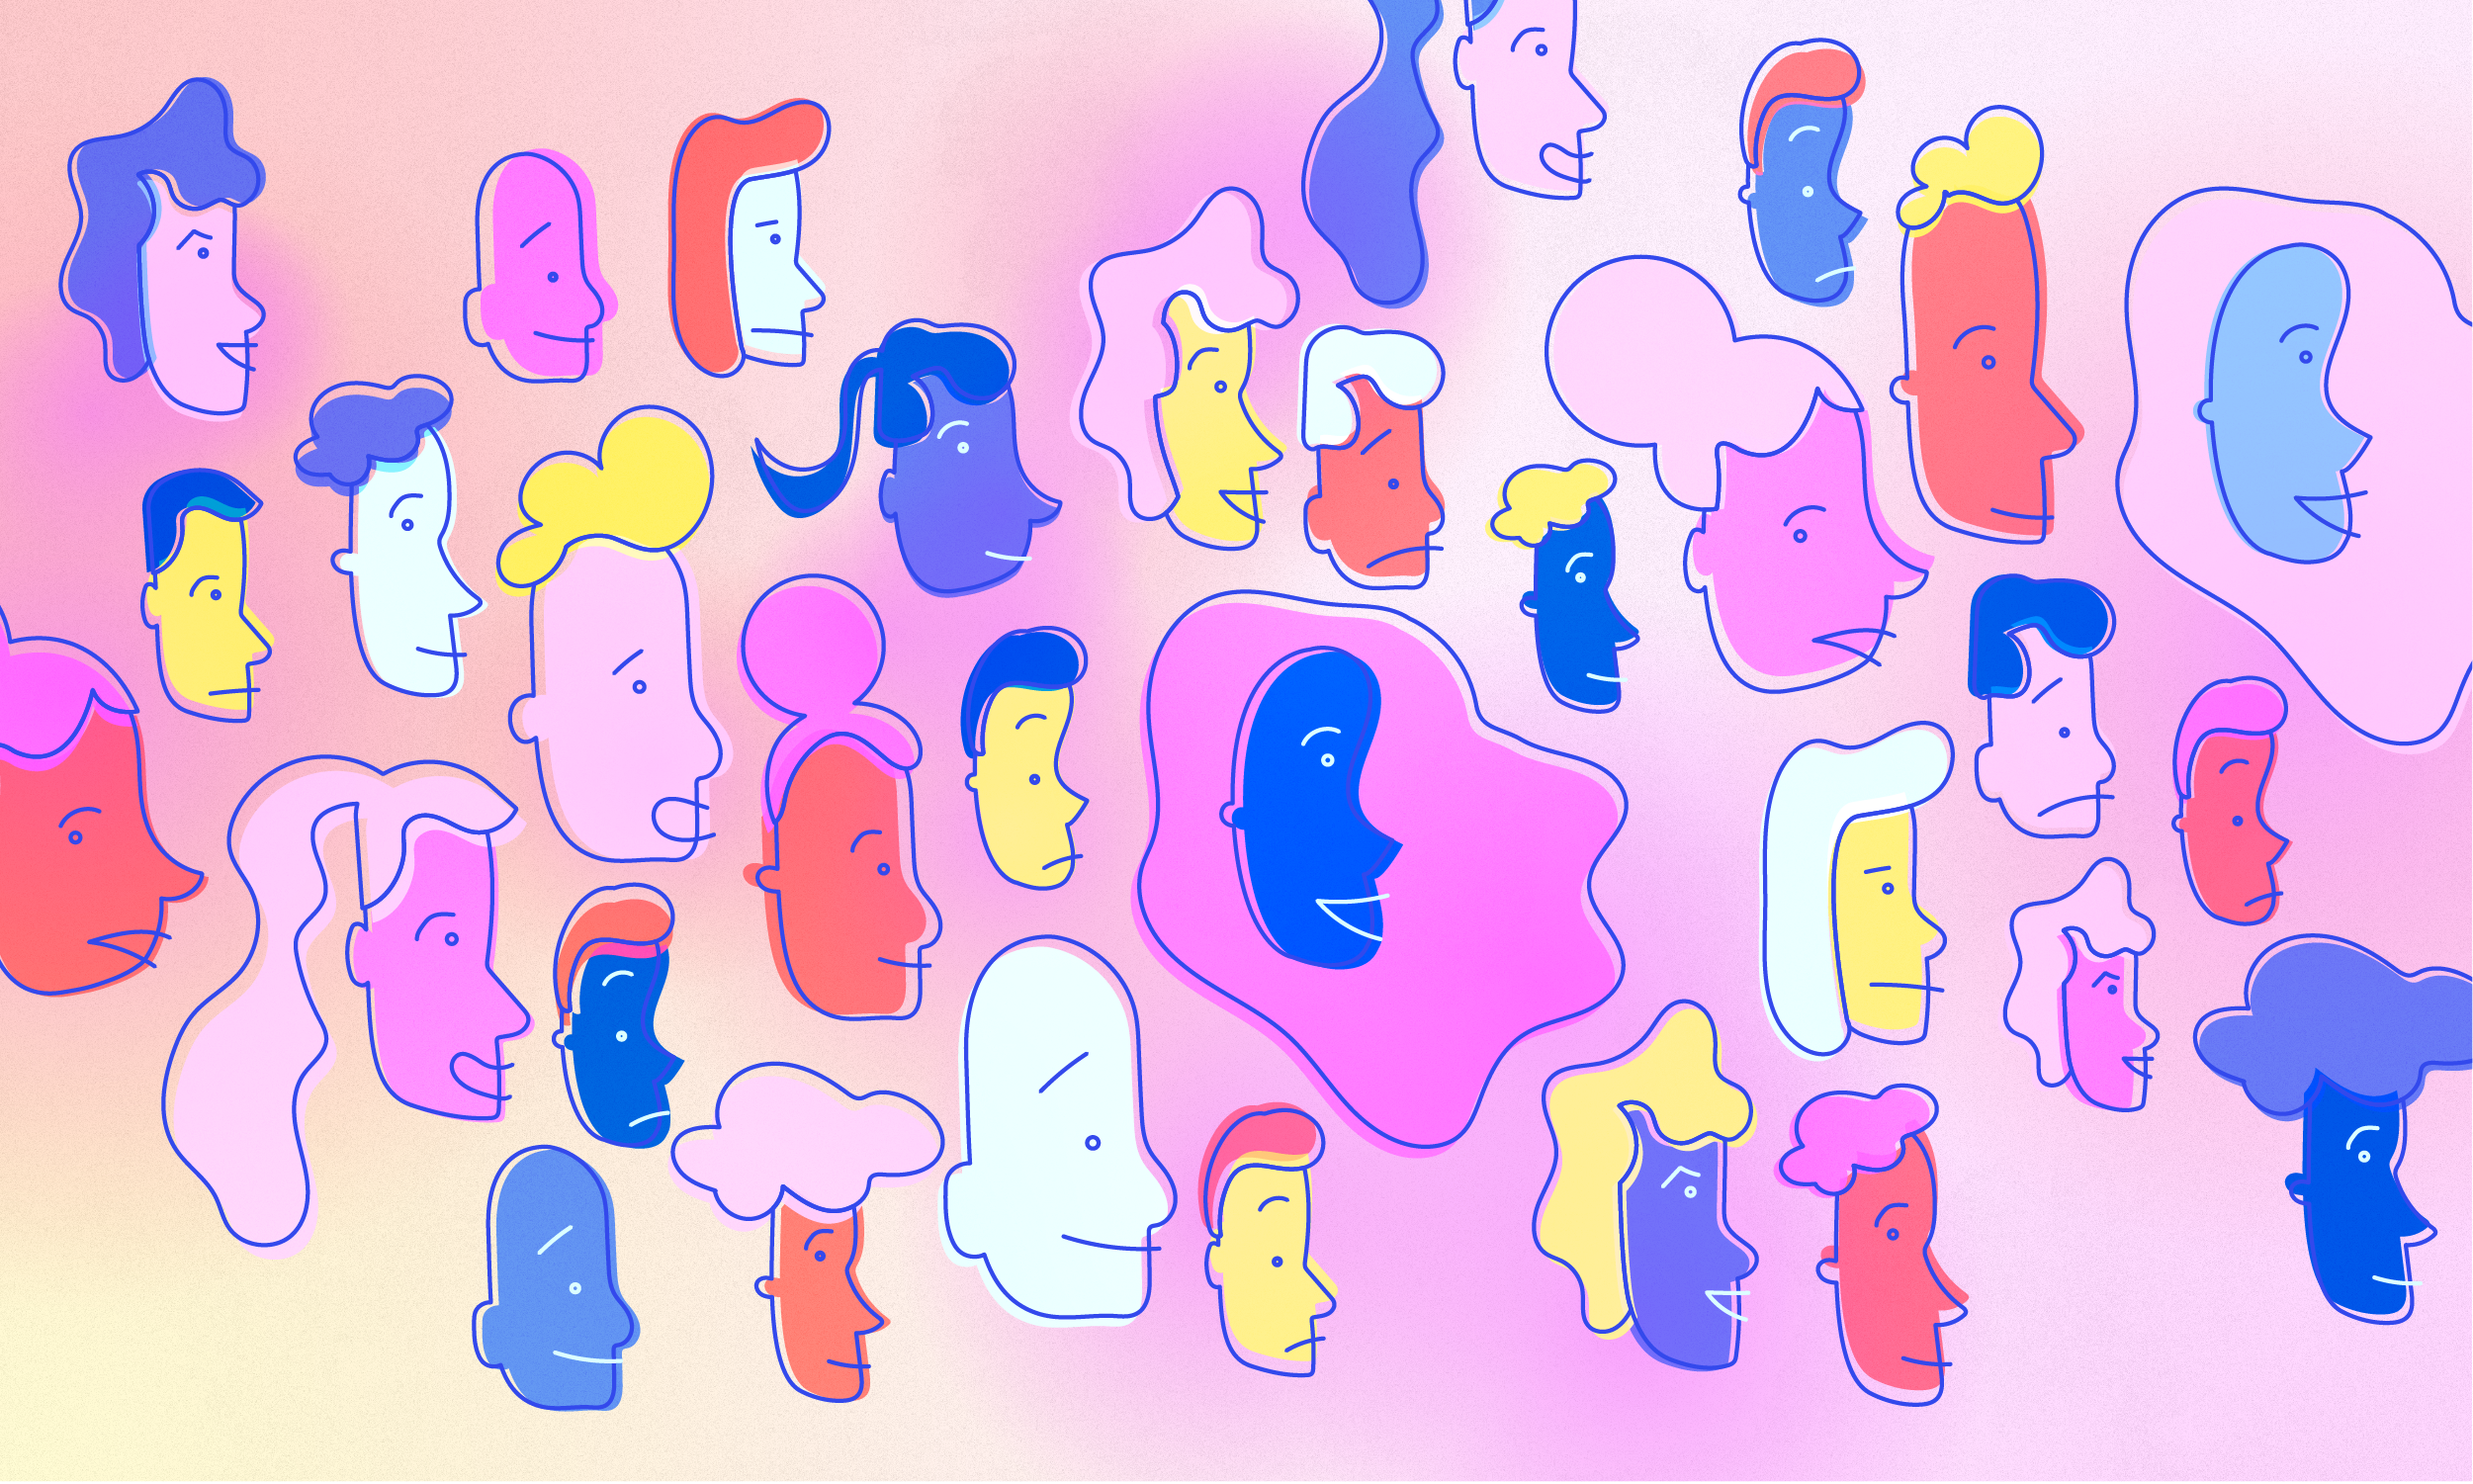 An illustration of faces in tones of blue and pink representing different emotions. 